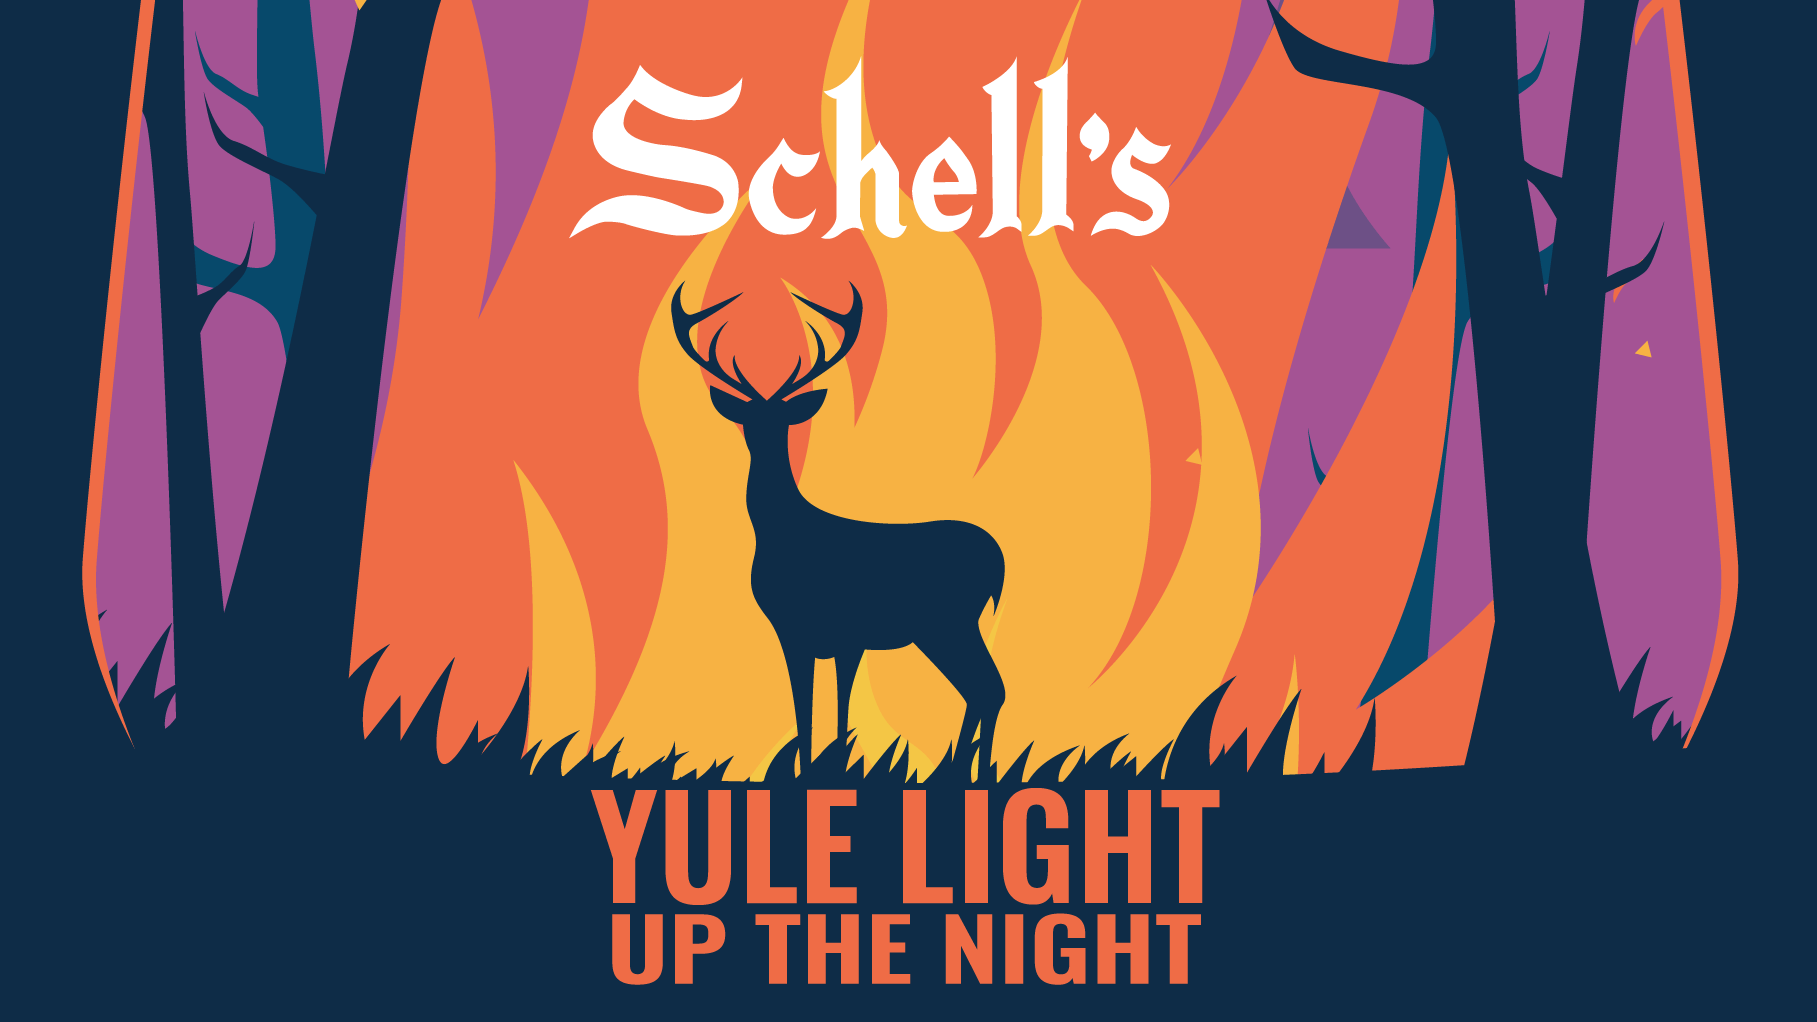 artistic woods scene with deer standing in front of fire between trees. text: "Schell's Yule Light up the Night"